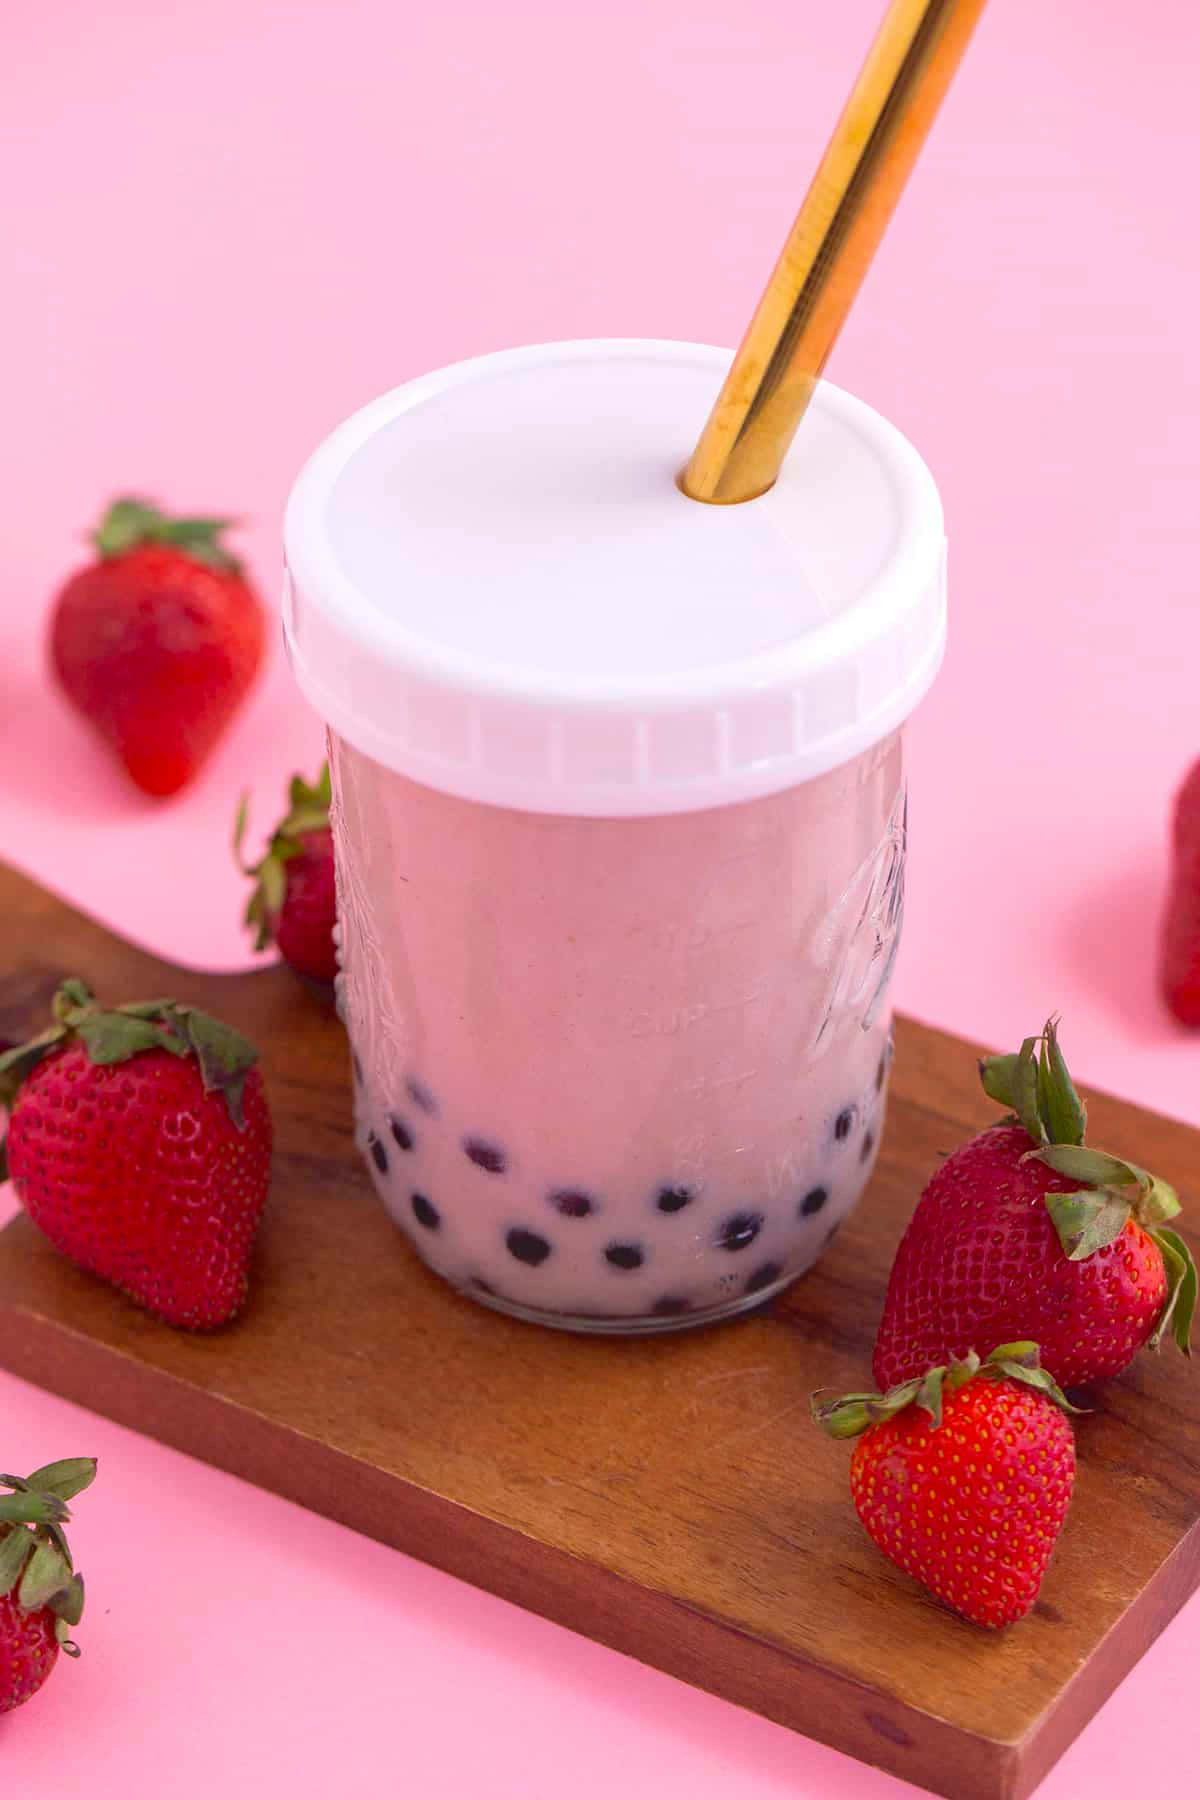 A Cup Of Bubble Tea With Strawberries And A Gold Spoon